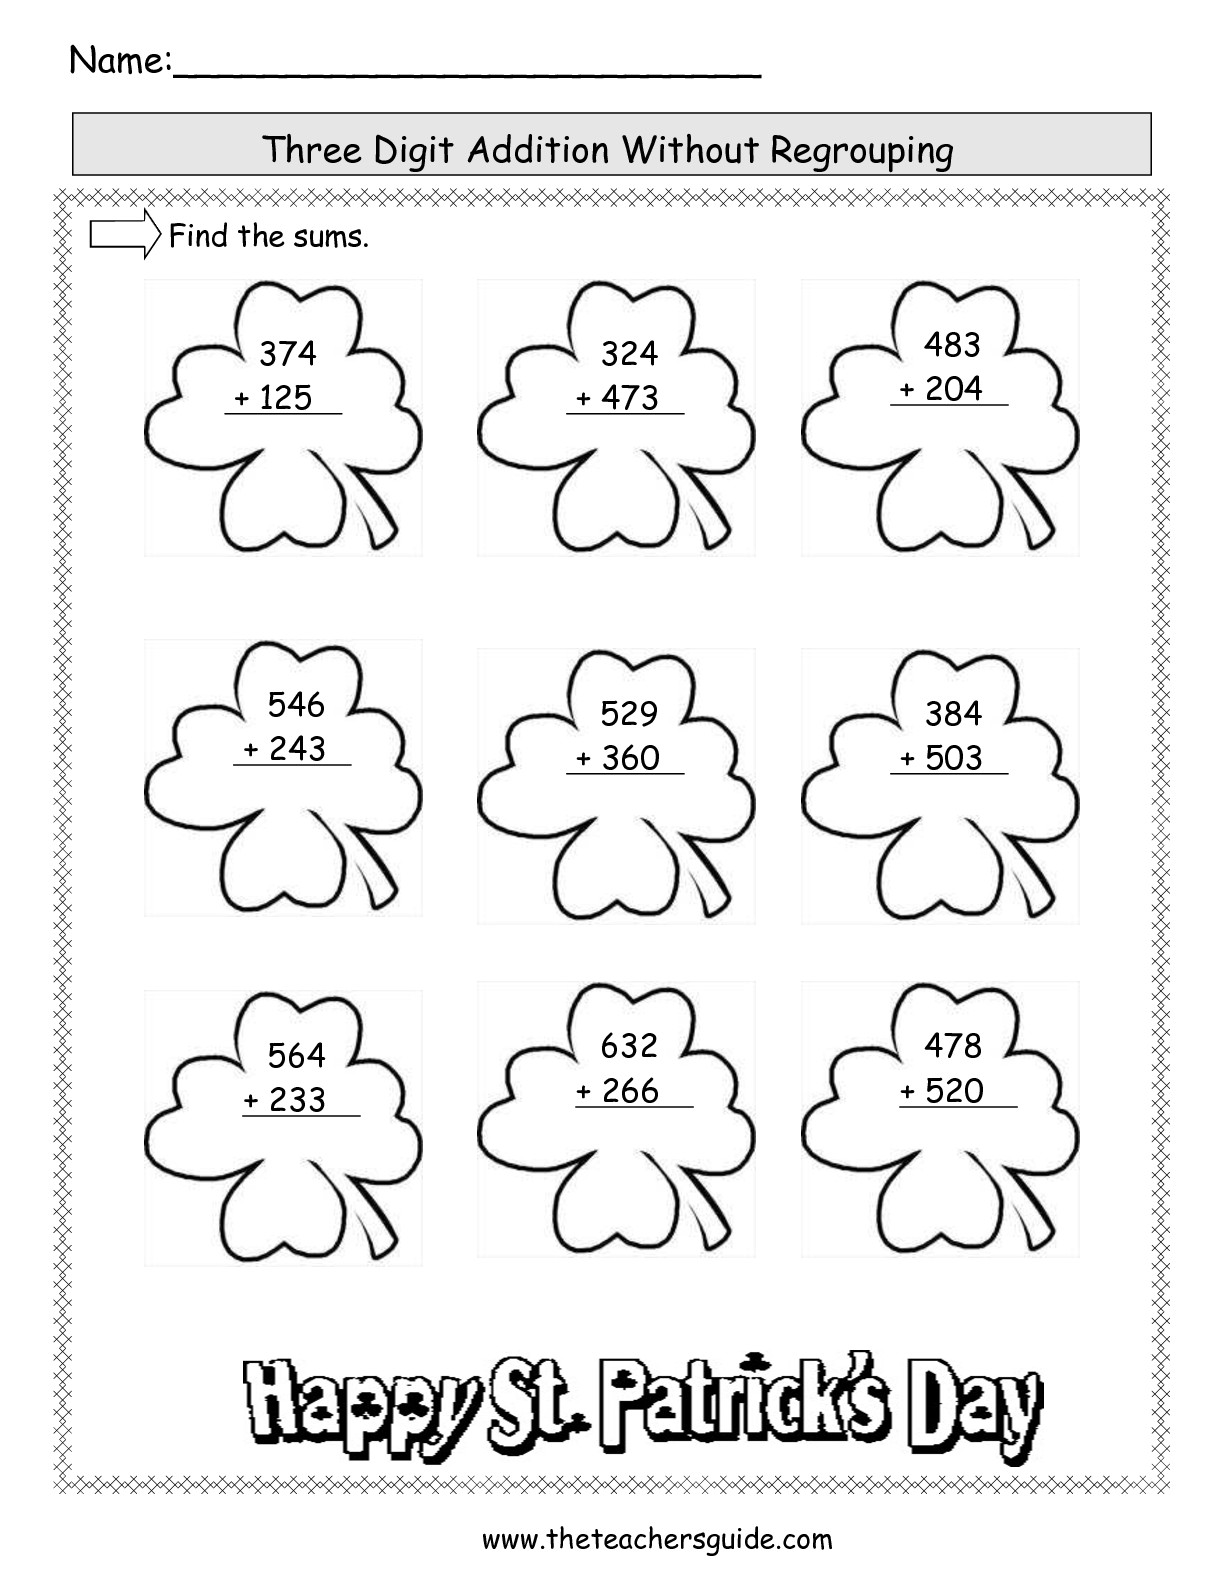 Three-Digit Addition with Regrouping Worksheets Image